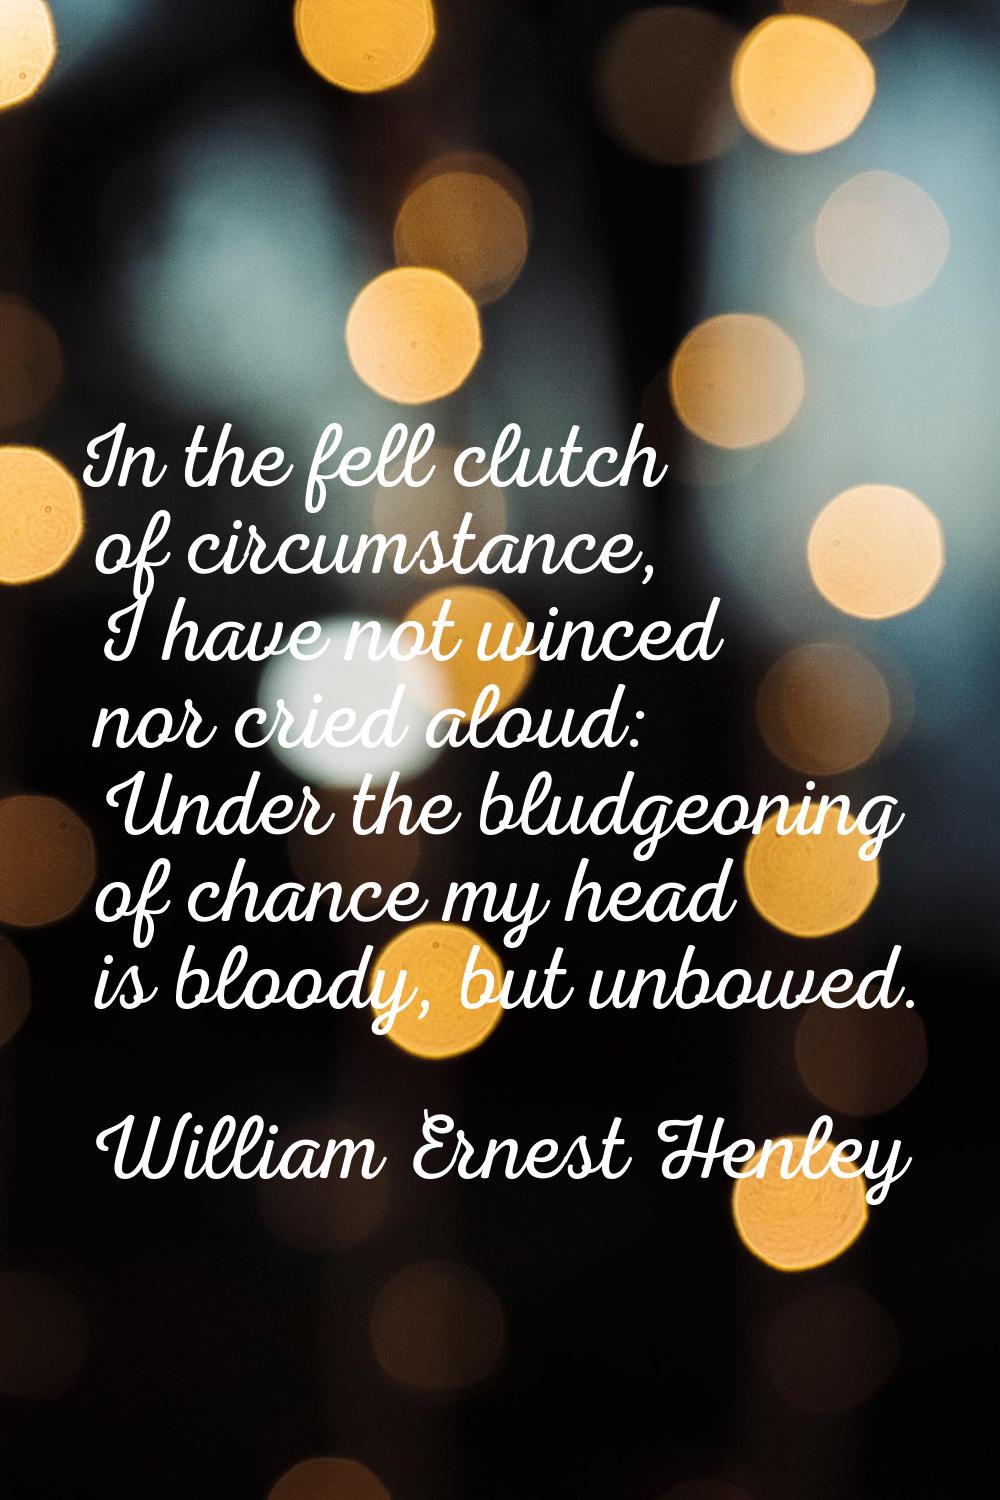 In the fell clutch of circumstance, I have not winced nor cried aloud: Under the bludgeoning of cha